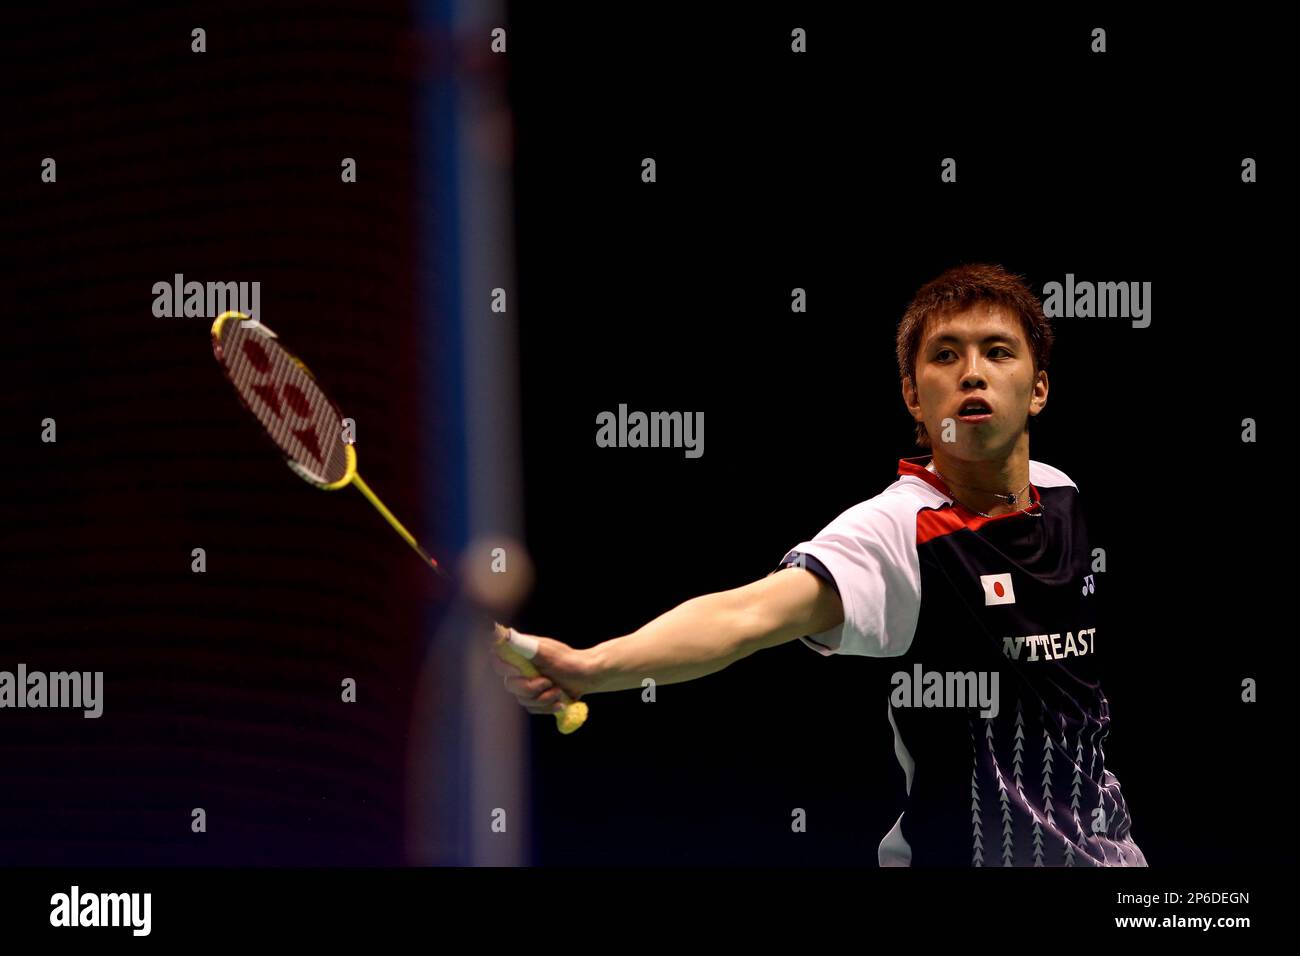 Kenichi Tago of Japan returns a shot to Taufik Hidayat of Indonesia during their mens singles match in the quarter-final round of the Thomas Cup badminton championship in Wuhan in central Chinas